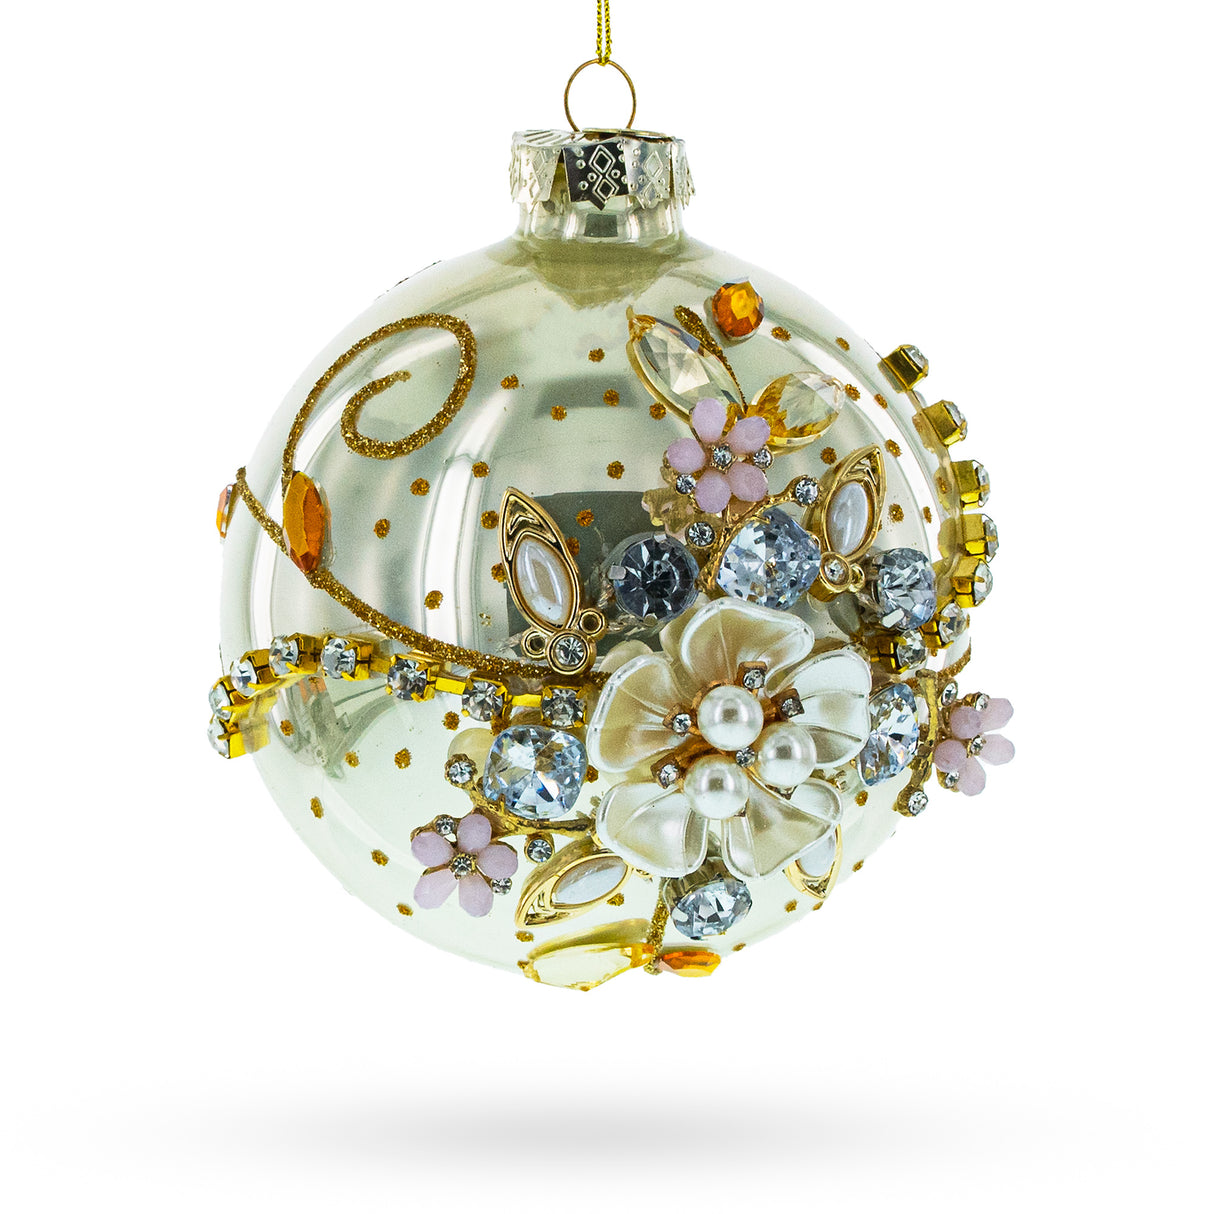 Exquisite Jeweled Flowers Adorning - Blown Glass Ball Christmas Ornament in Silver color, Round shape